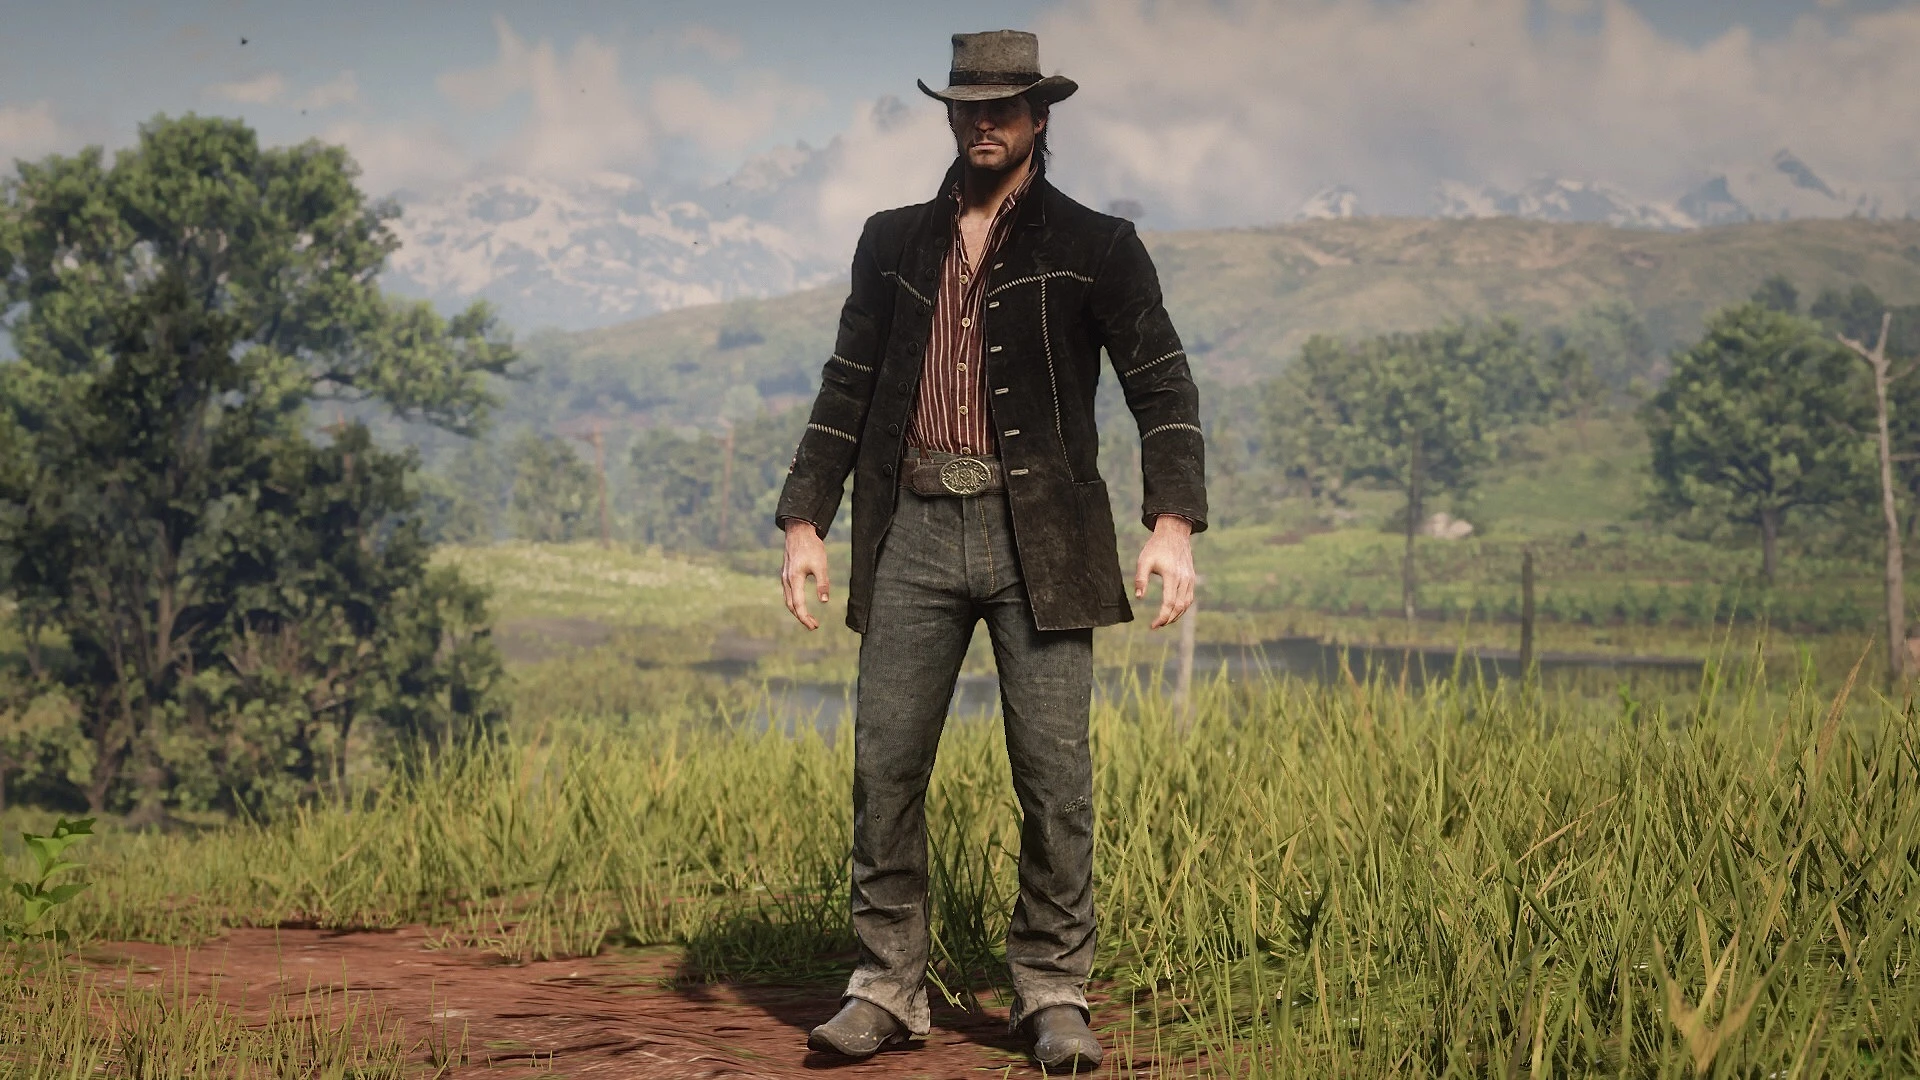 John at Red Dead Redemption 2 Nexus - Mods and community